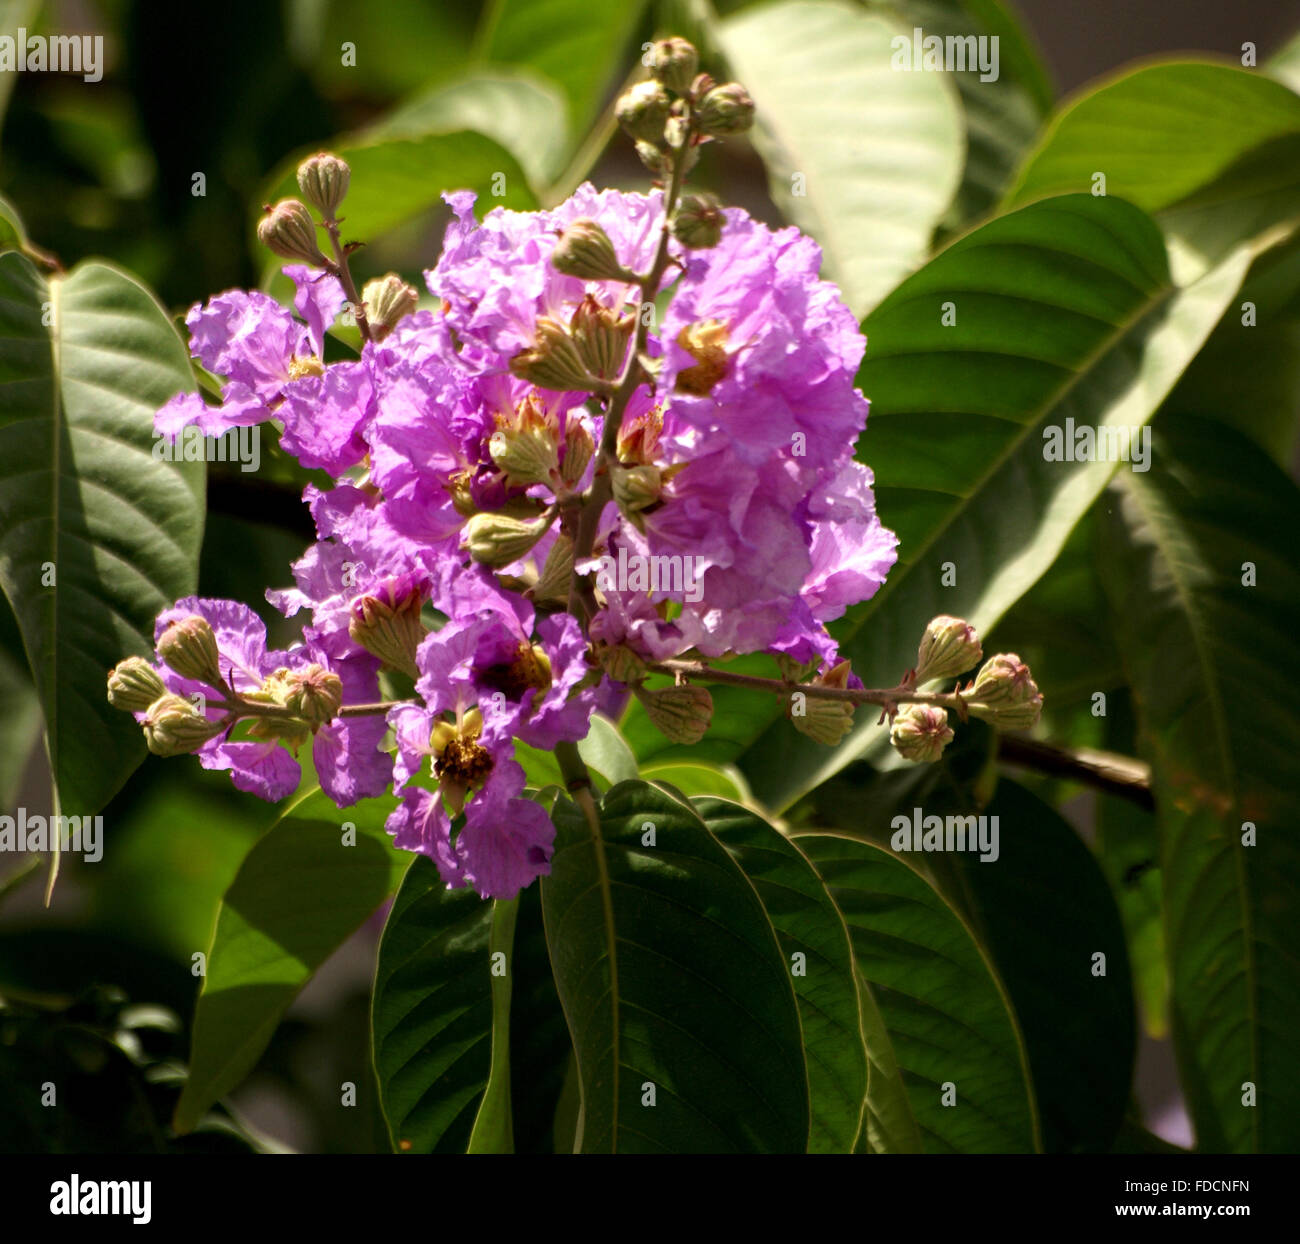 Lagerstroemia speciosa, Pride of India, tree with large elliptic oblong to ovate leaves, purple flowers in panicles Stock Photo